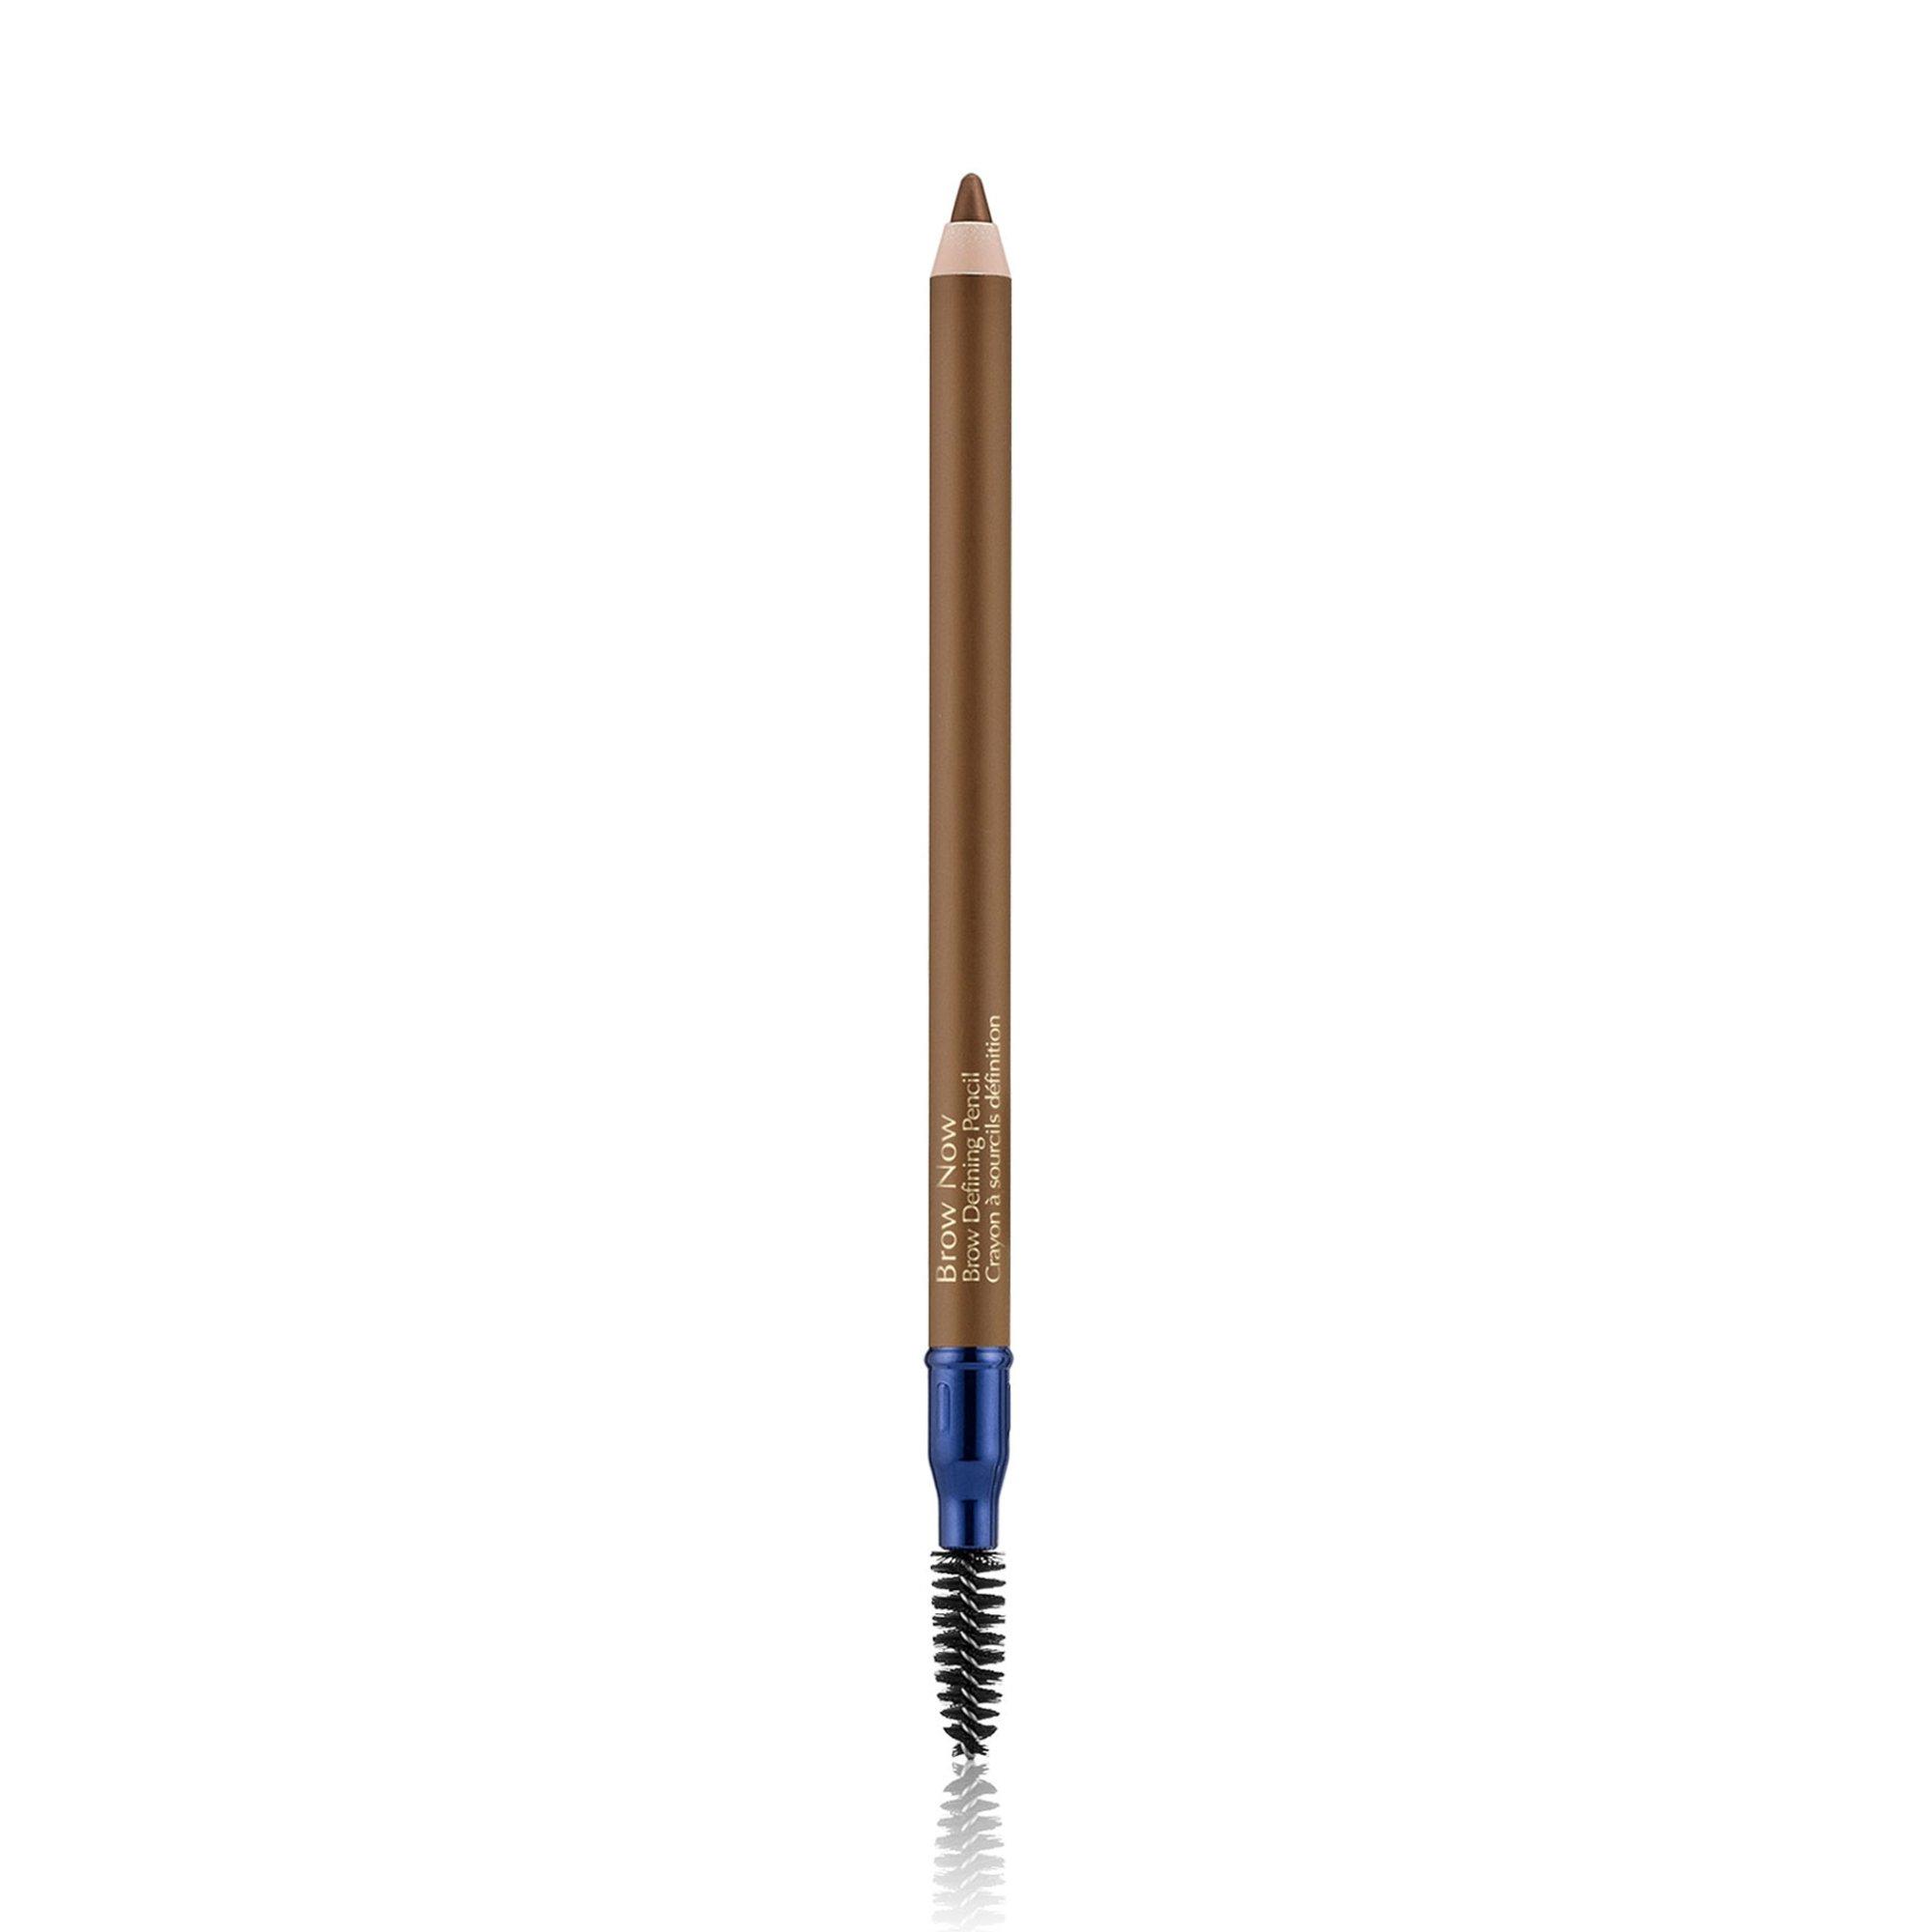 Brow Now - Brow Defining Pencil 03 Brunette